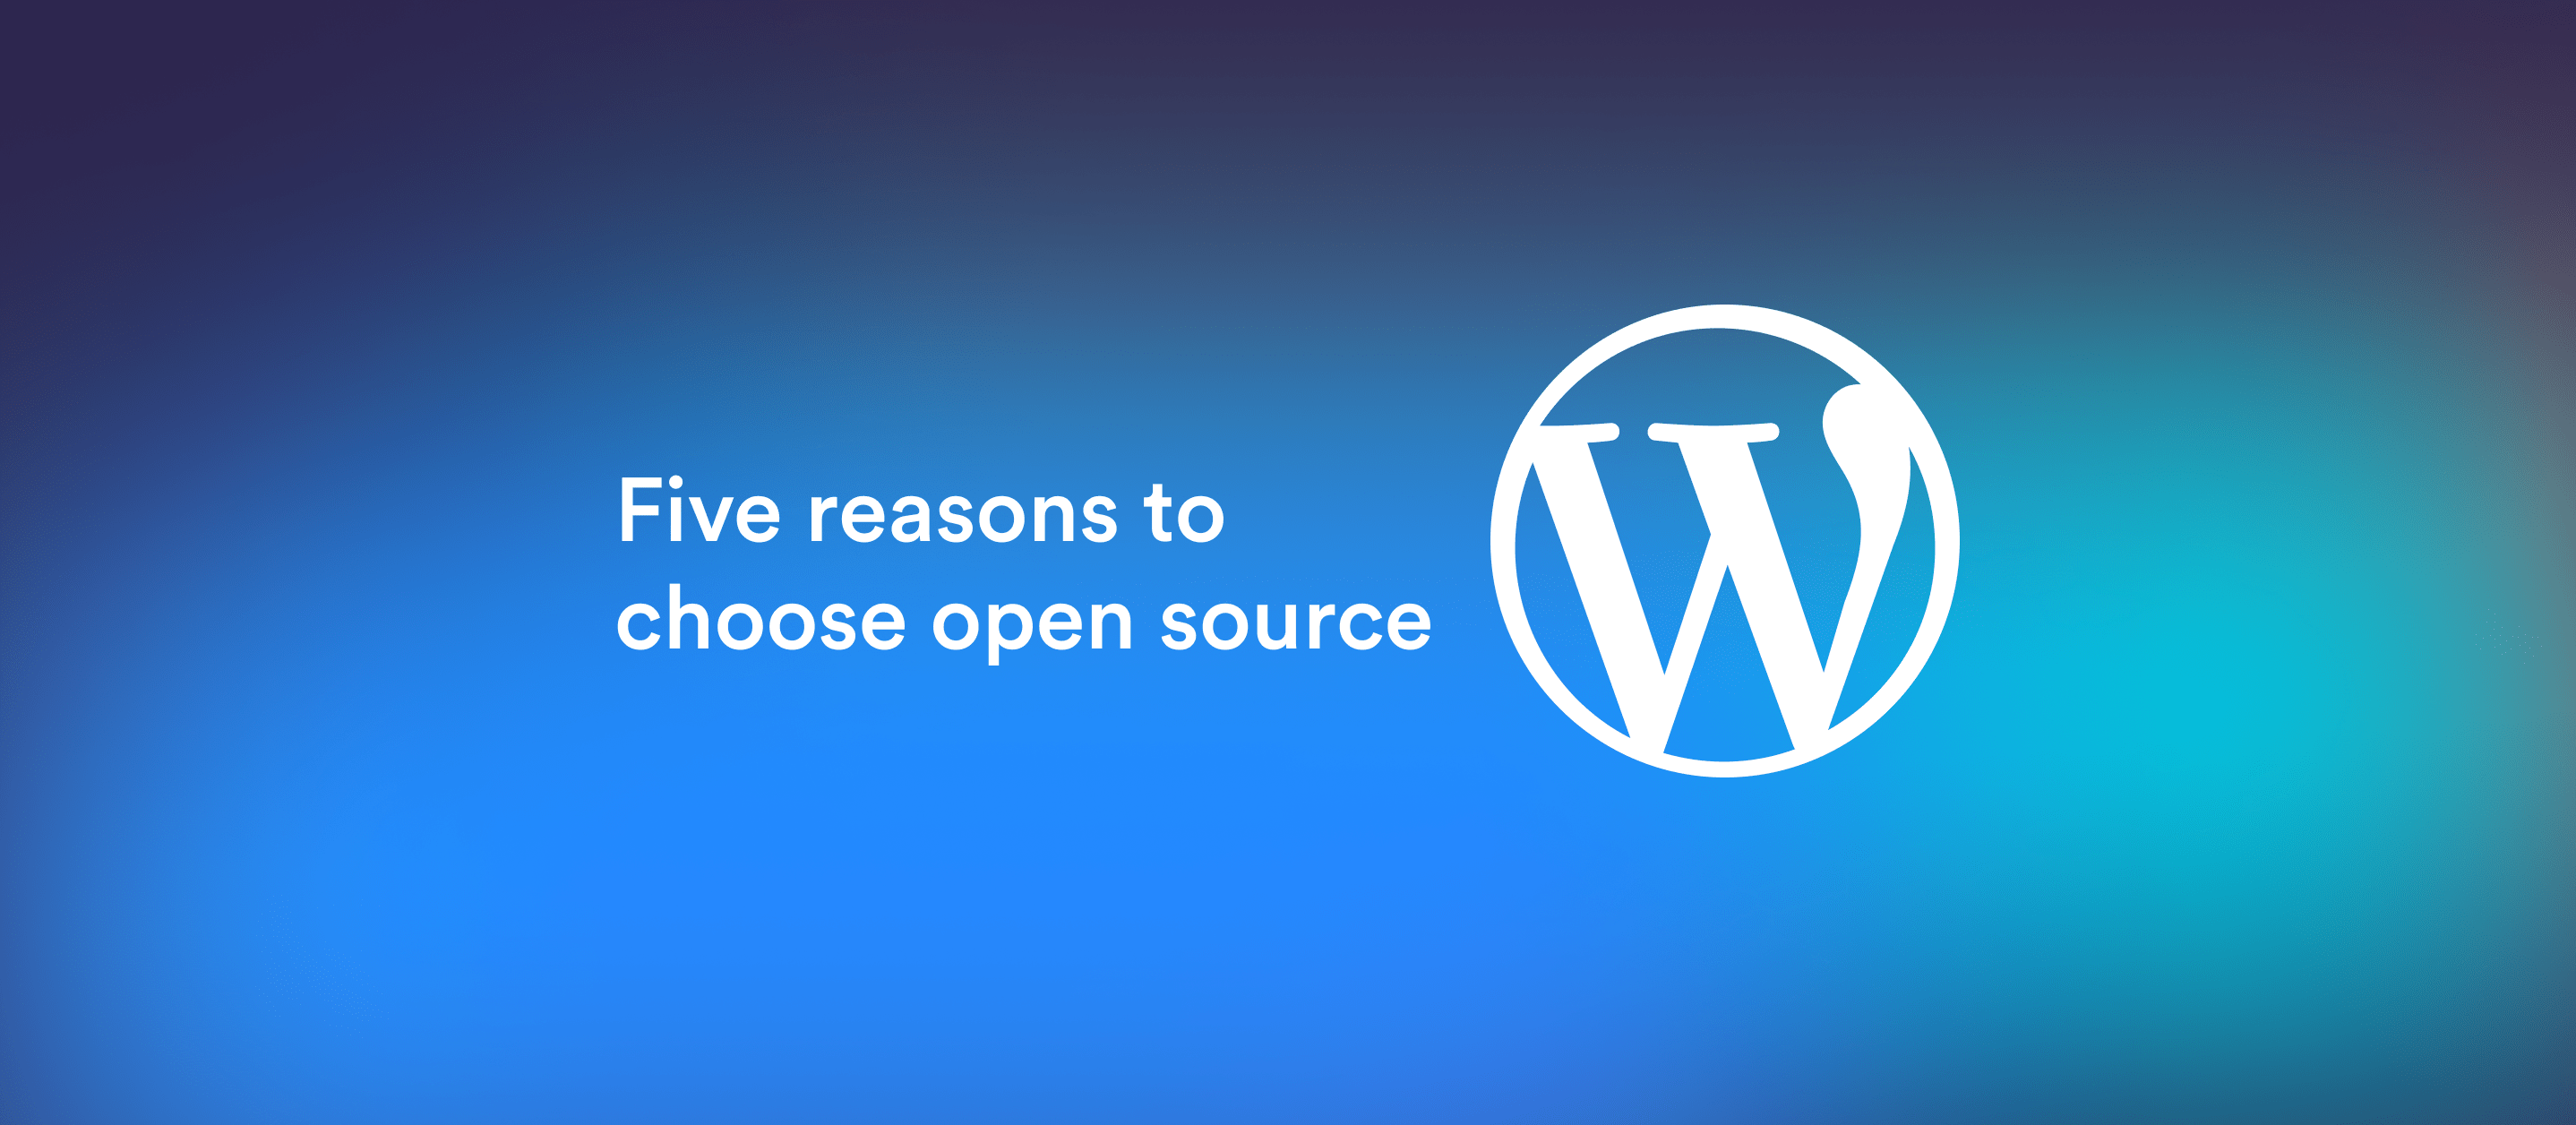 Five reasons to choose open source